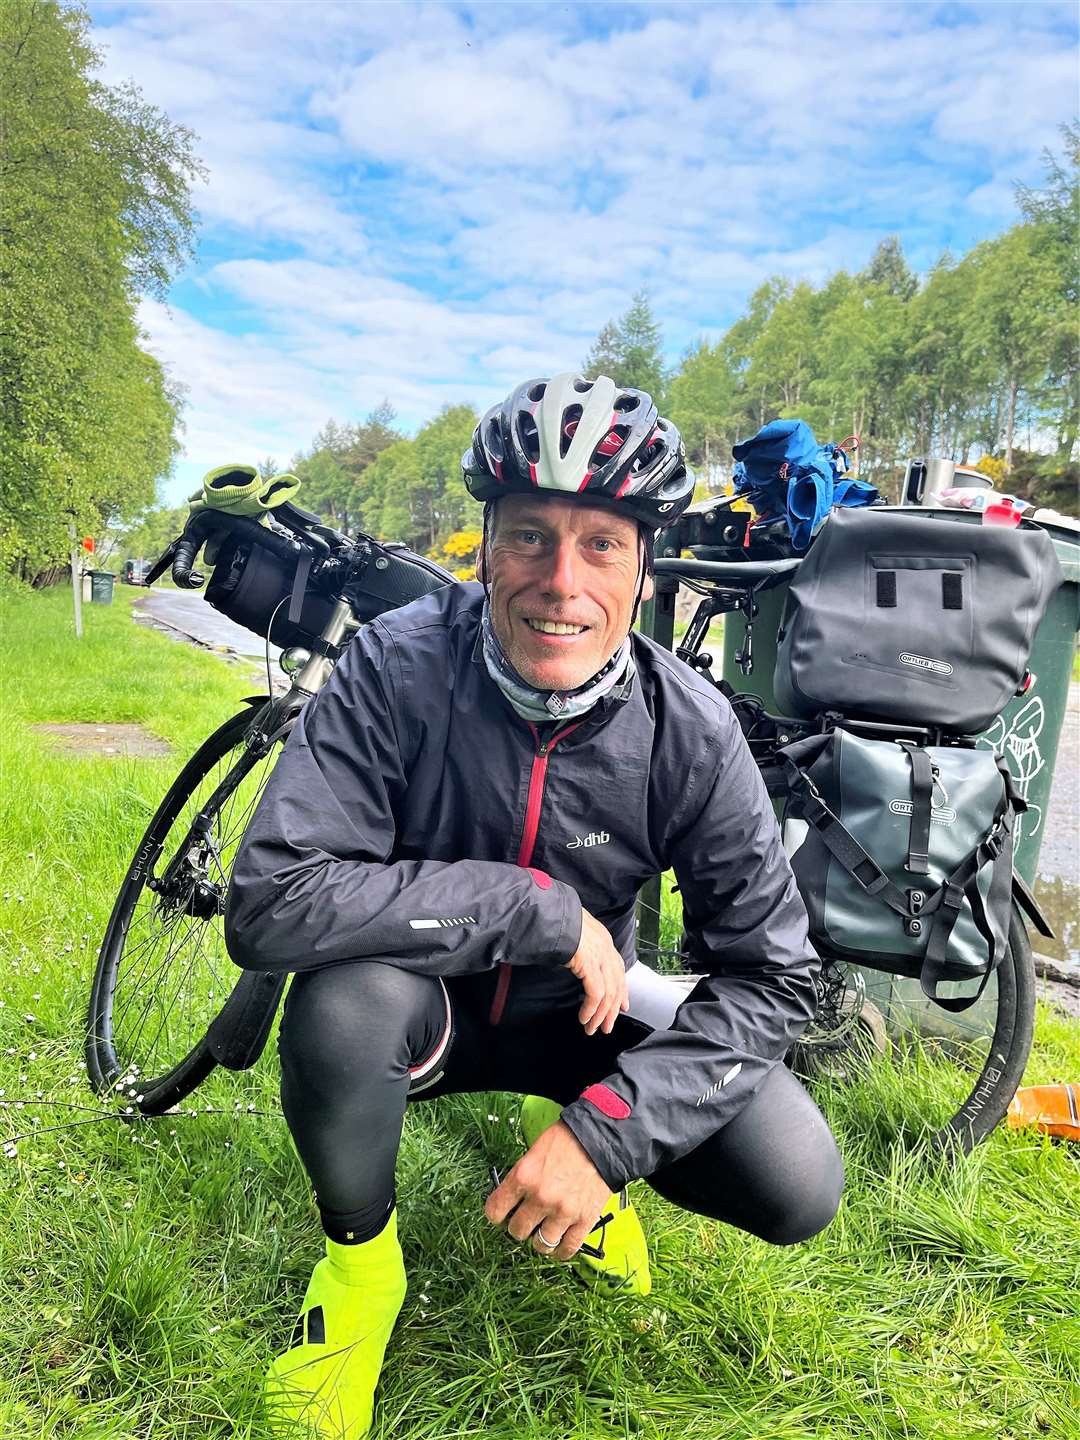 Tim Styles on his Lejog cycle ride last year. He is setting off on the same journey but including the return trip to make it a Lejogle.